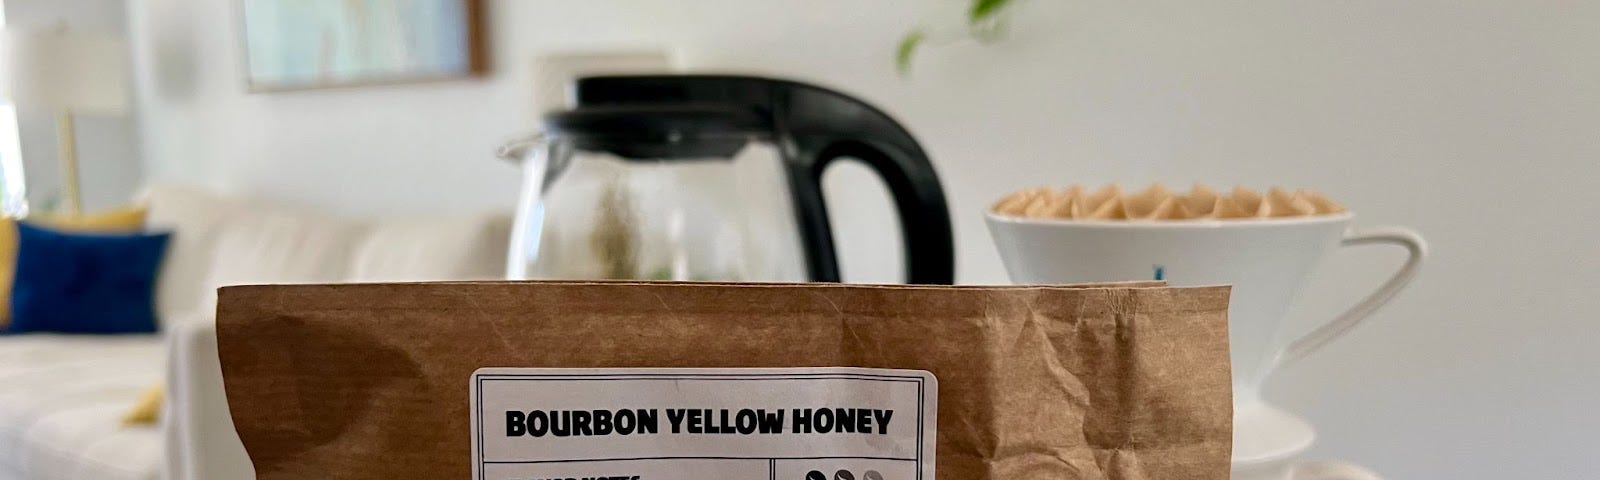 A hand holds up a bag of coffee labeled “Bourbon Yellow Honey.” In the background is a coffee mug, coffee pot, and furniture.